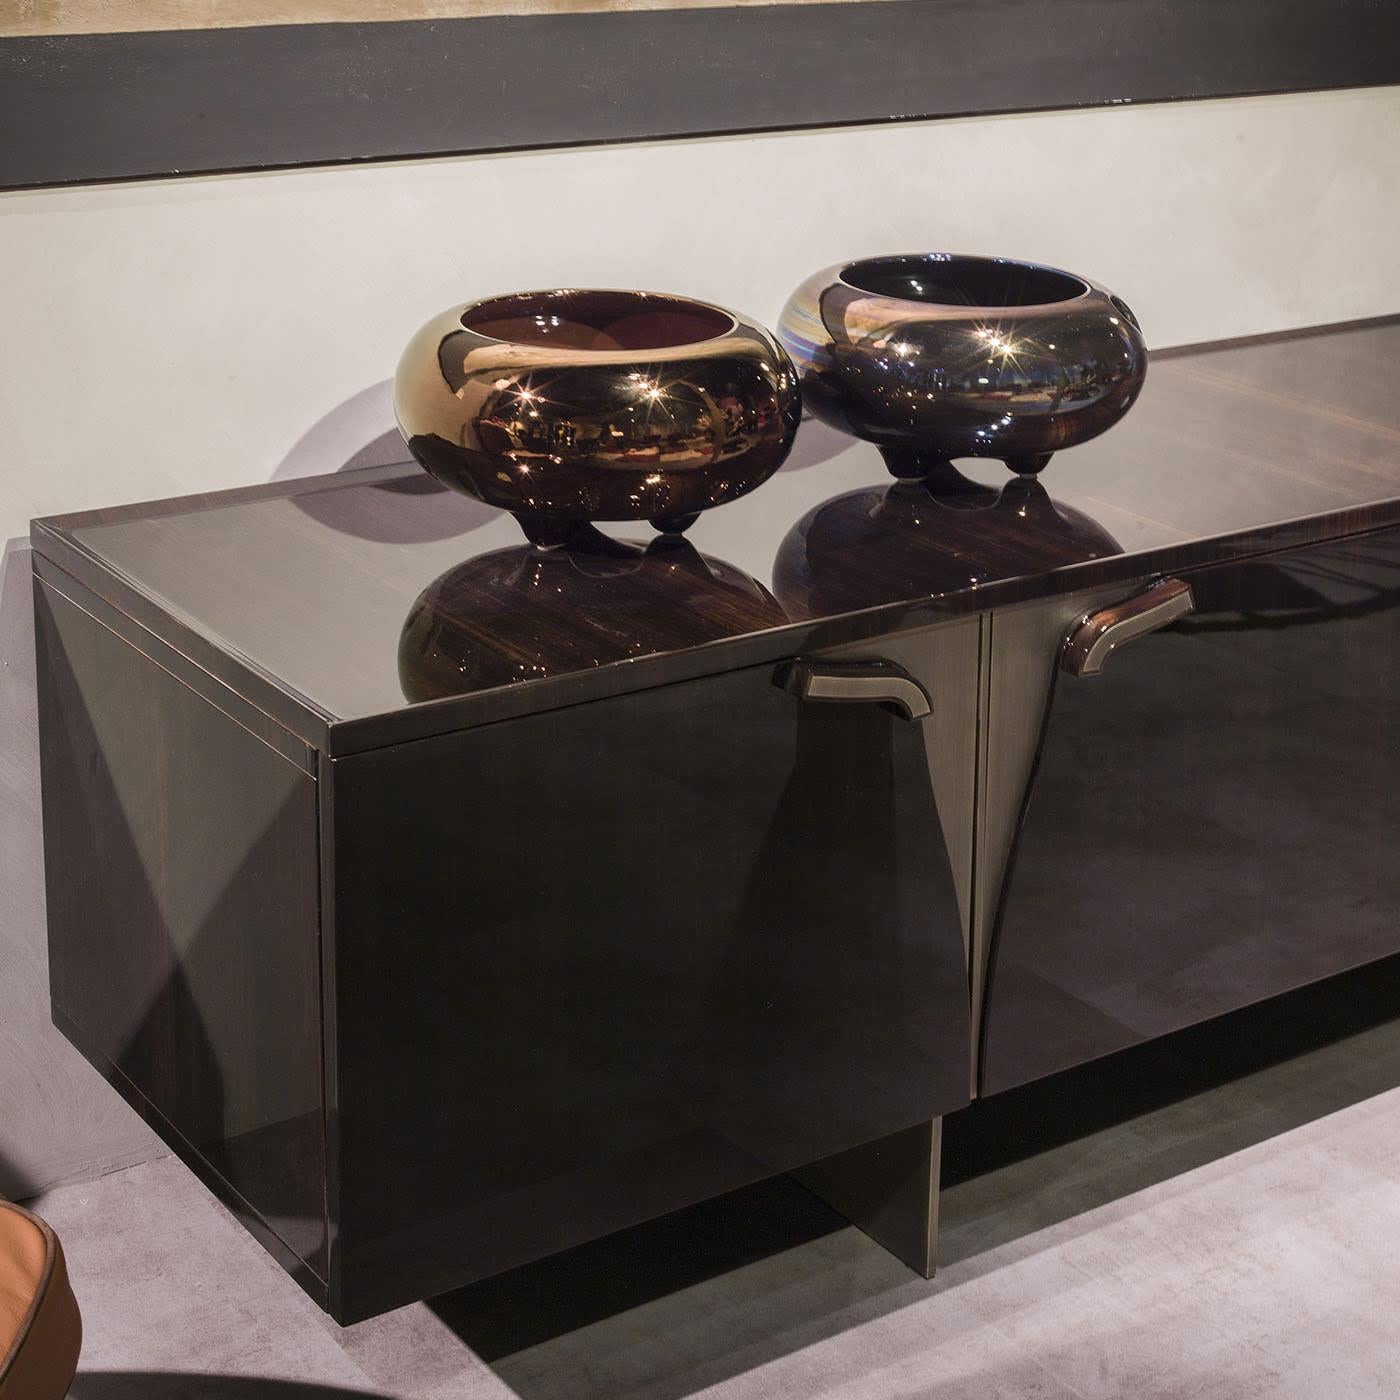 At once stylish and rigorous, this sideboard makes for a superb addition to exclusive living rooms or foyers of modern inspiration. Bronze-finished metal details create a seductive contrast with the linear and almost relaxing veins the eucalyptus